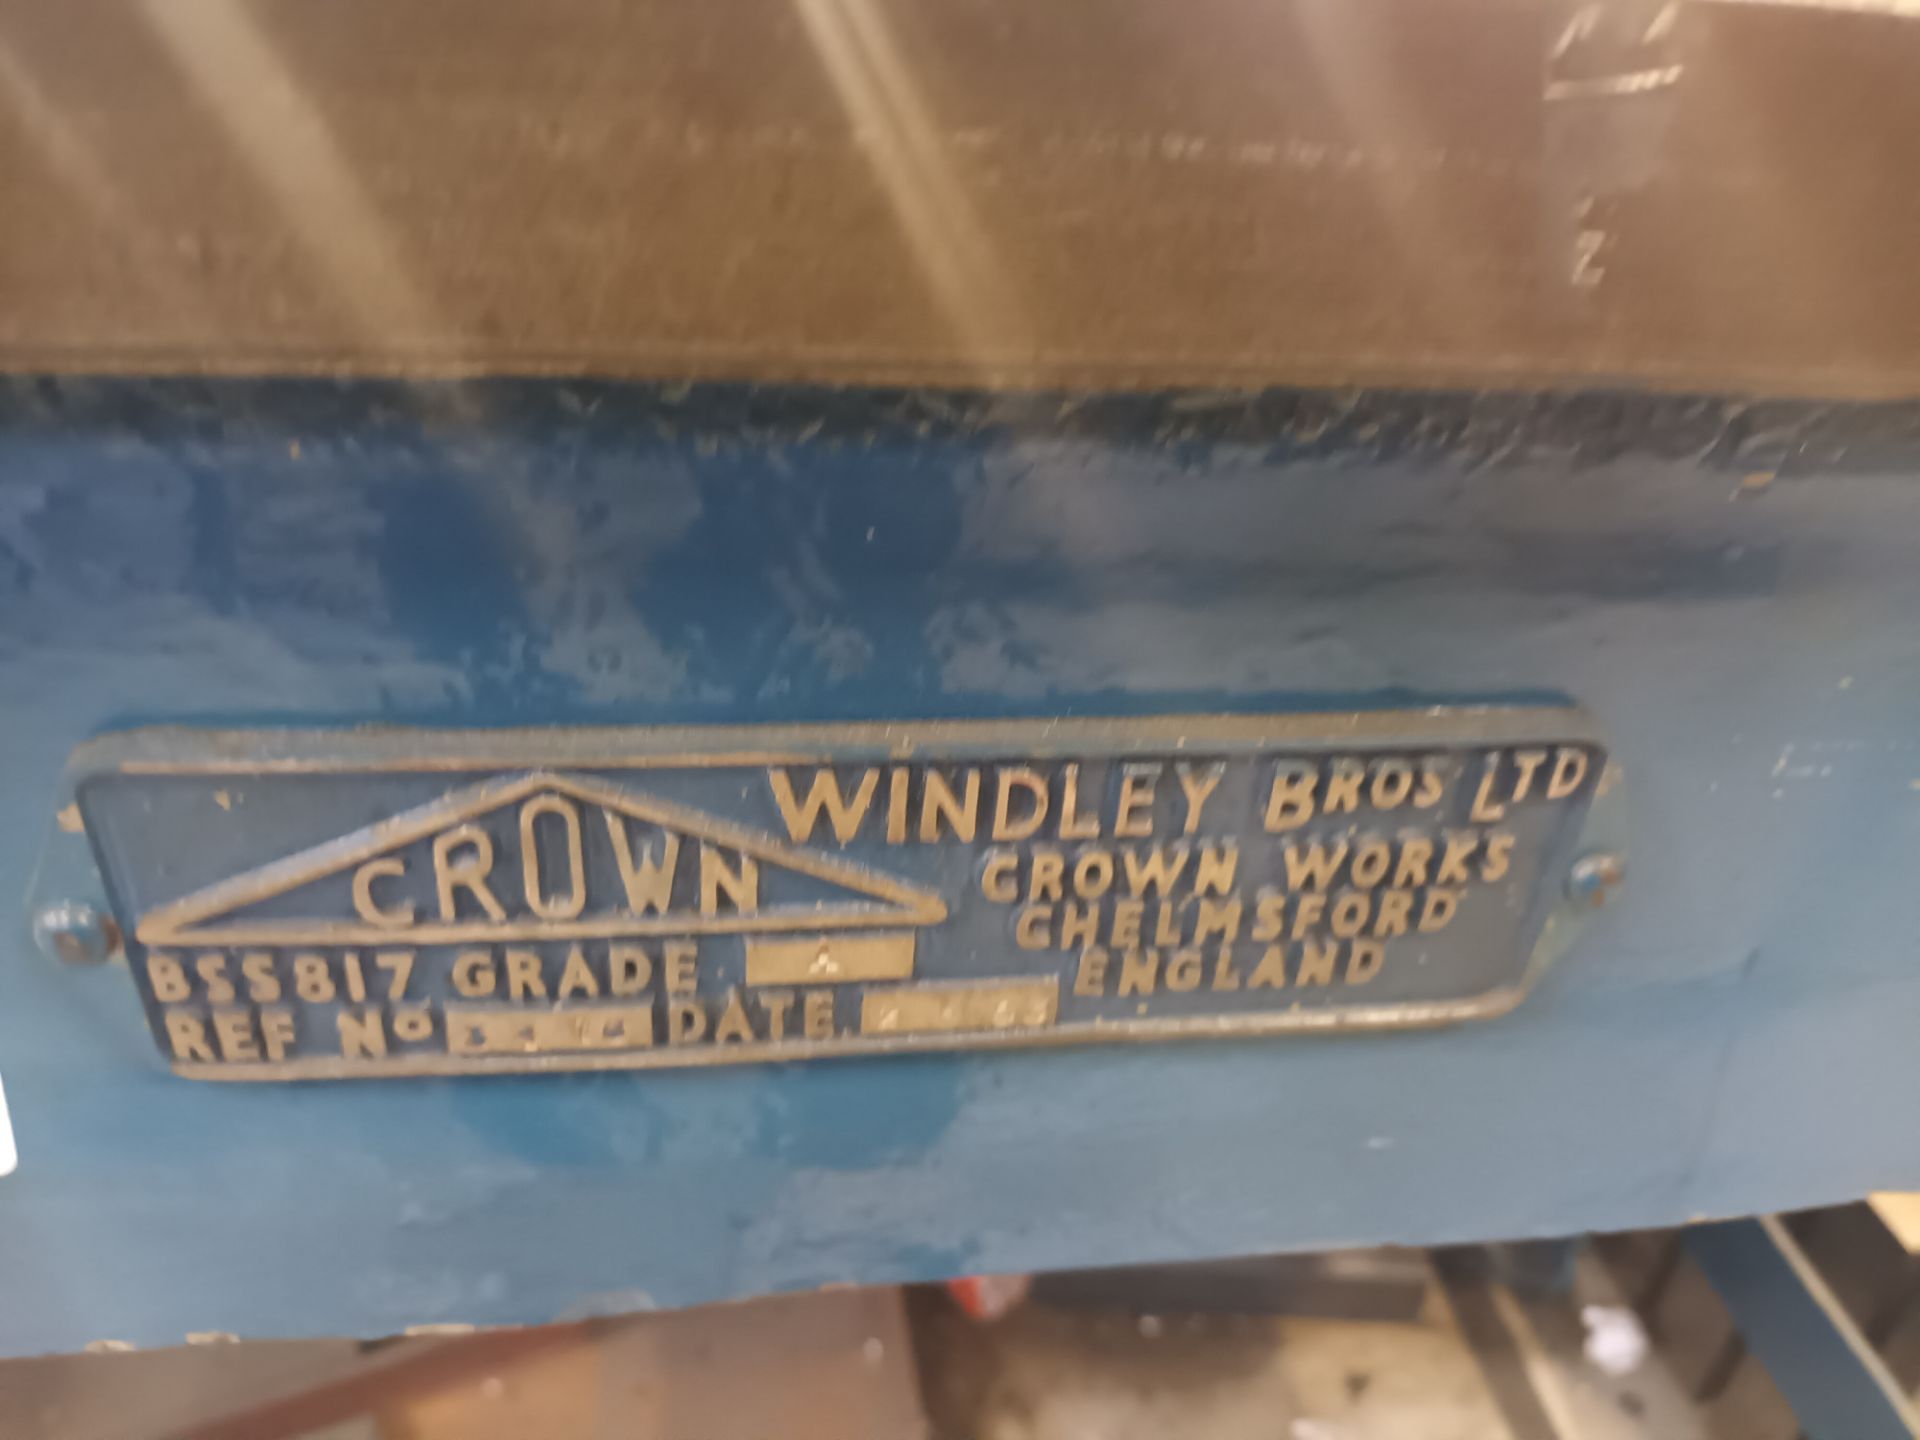 Crown BSS817 Grade A workbench - Image 2 of 3